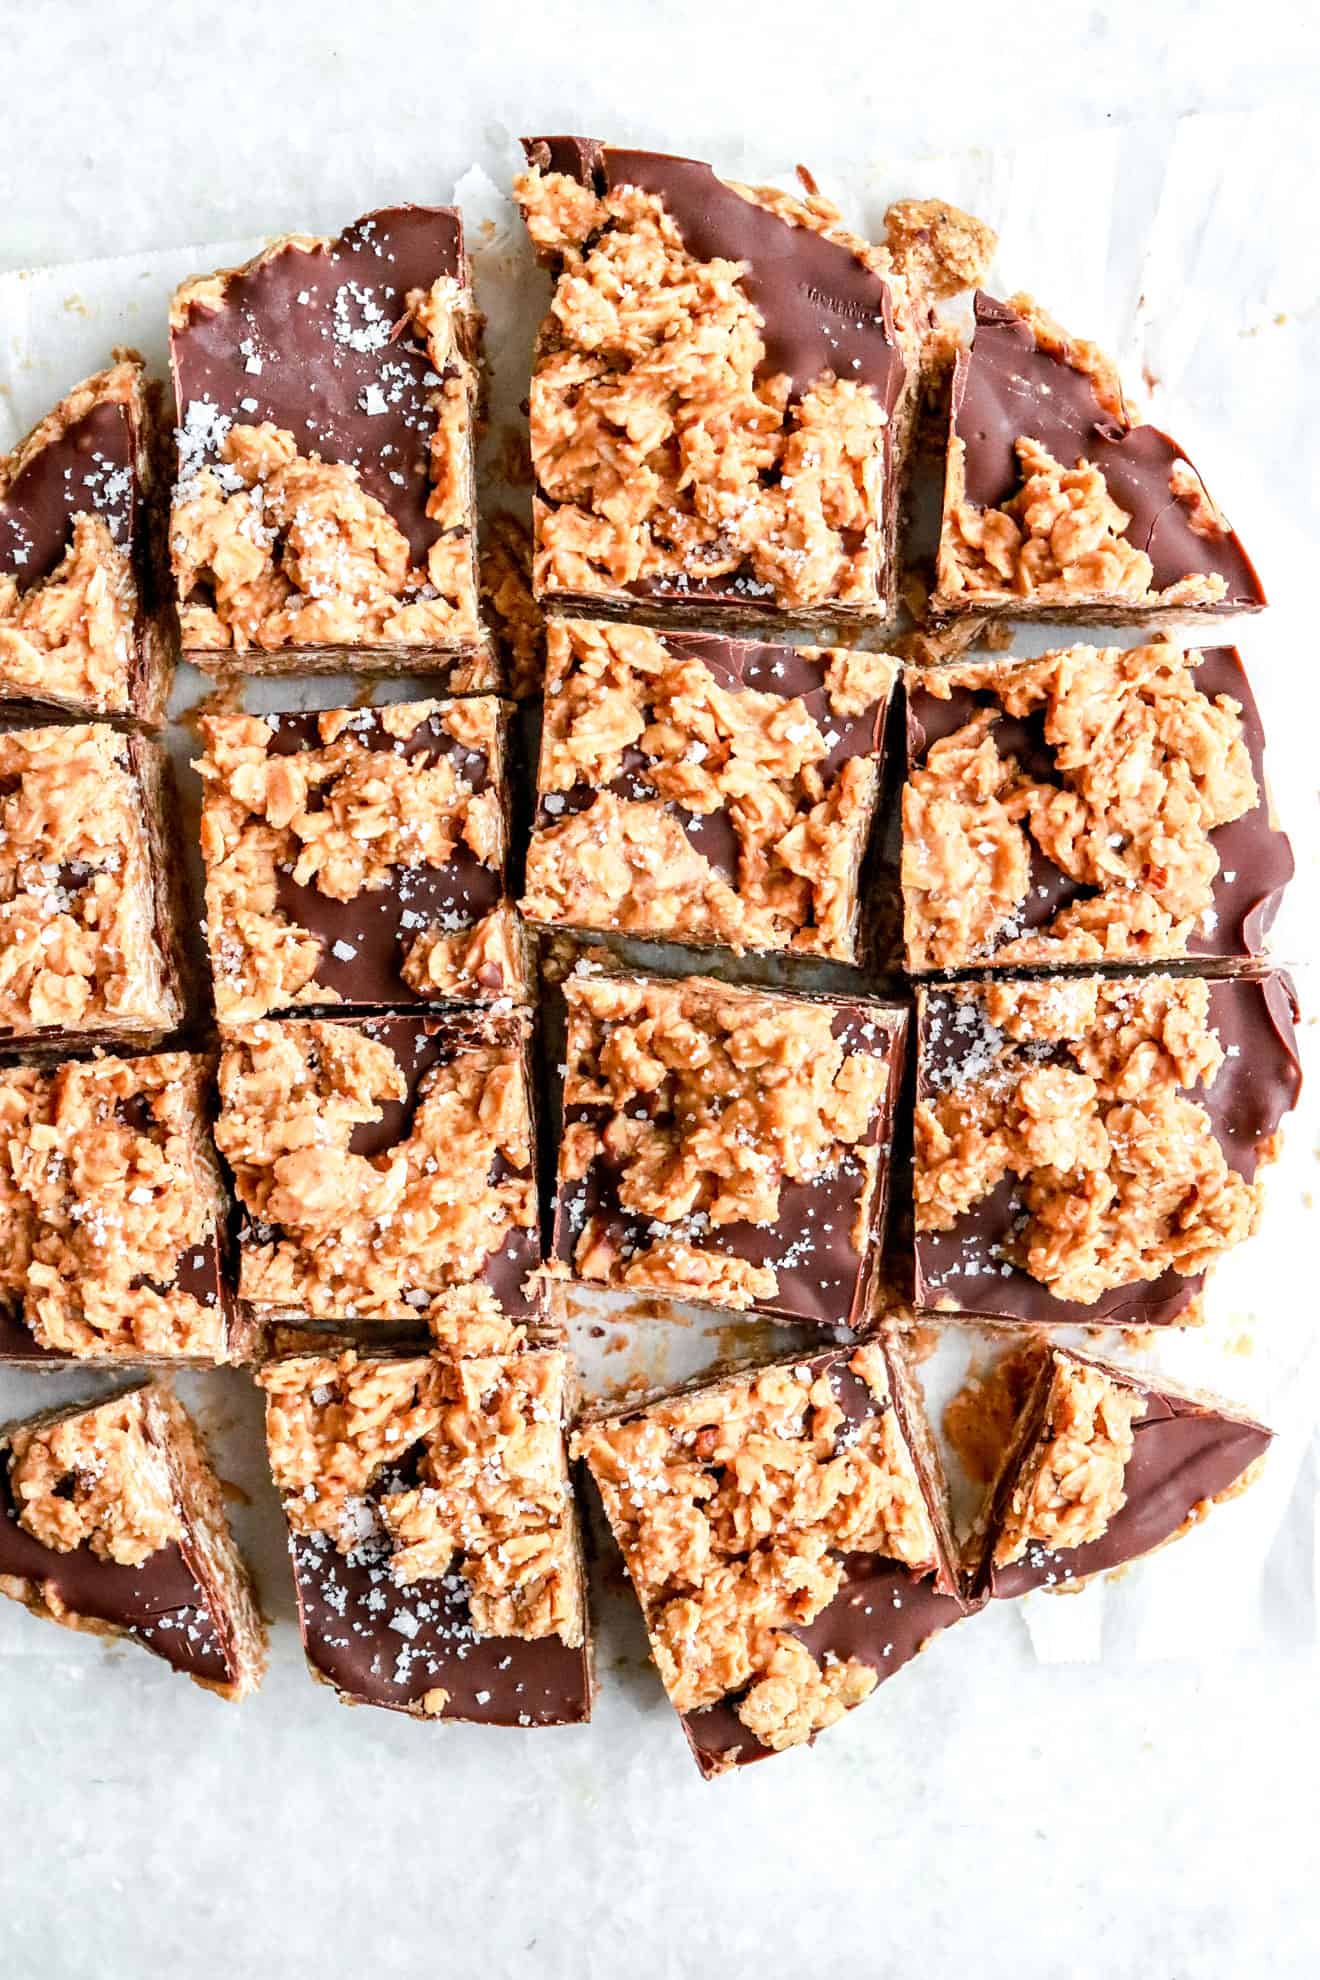 no bake chocolate and peanut butter oatmeal bars cut into squares on white parchment paper background